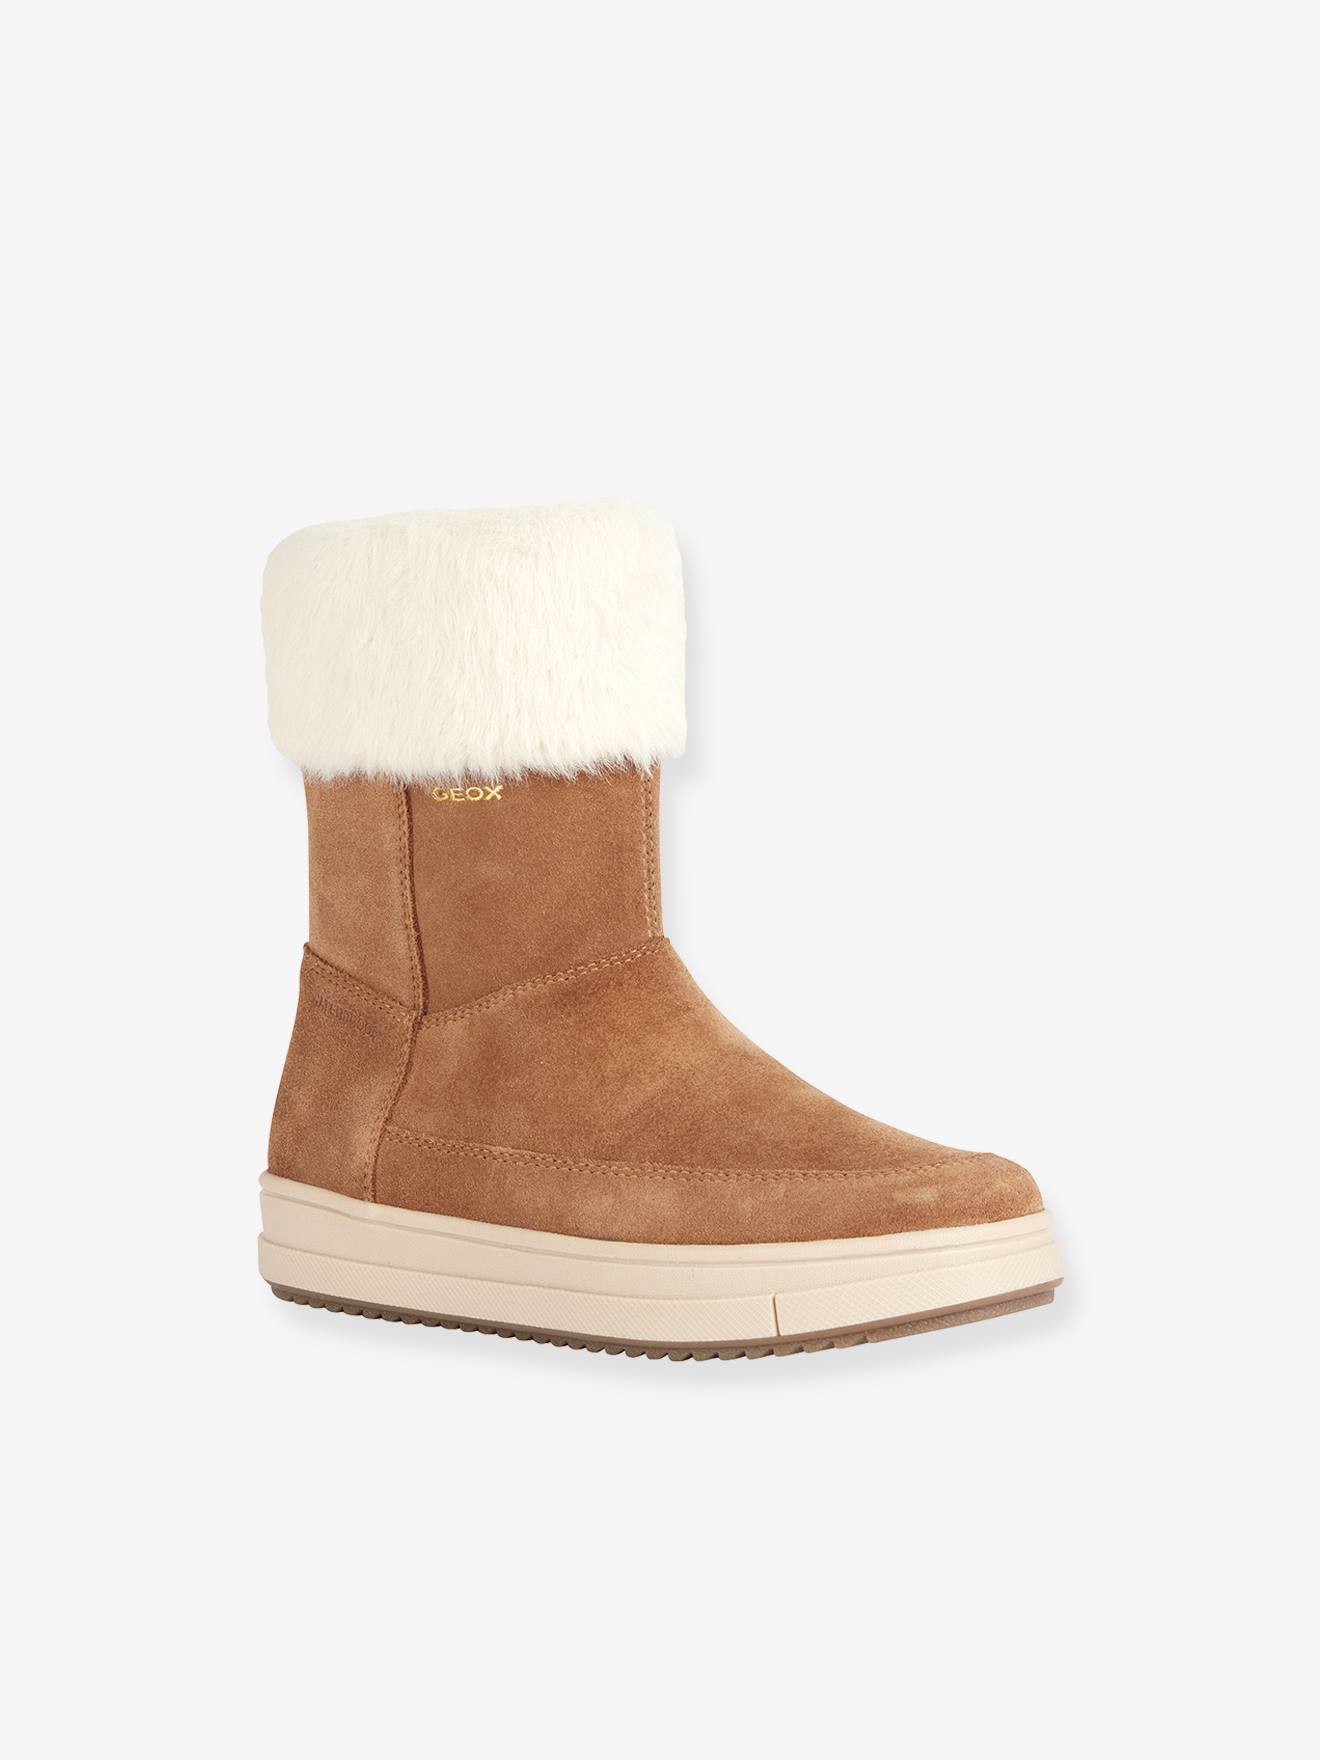 Furry Boots for Children, J Rebecca Girl WPF by GEOX(r) camel